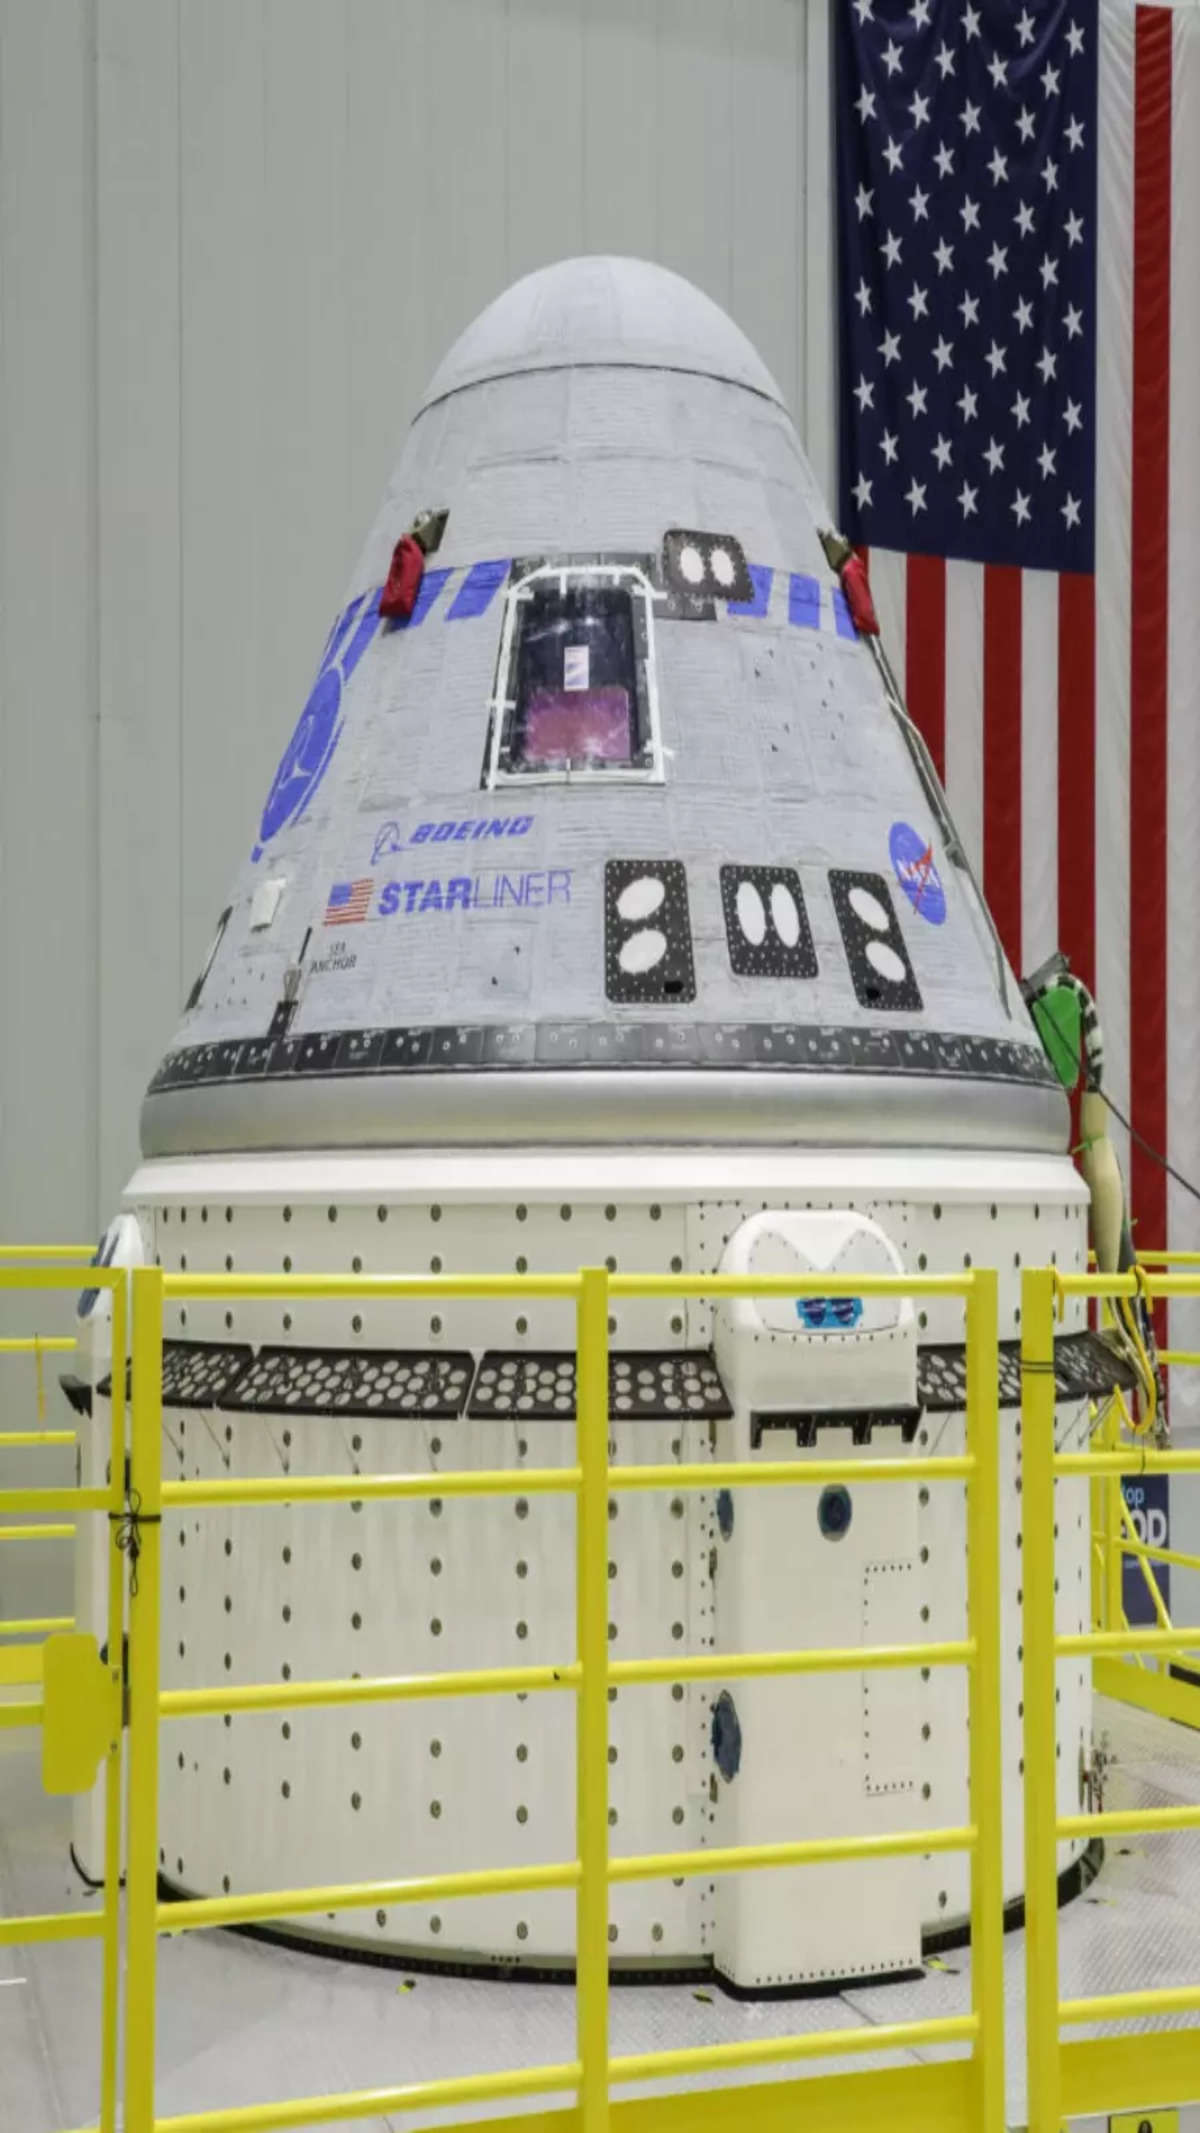 Boeing's Starliner to fly first crewed mission to space in April